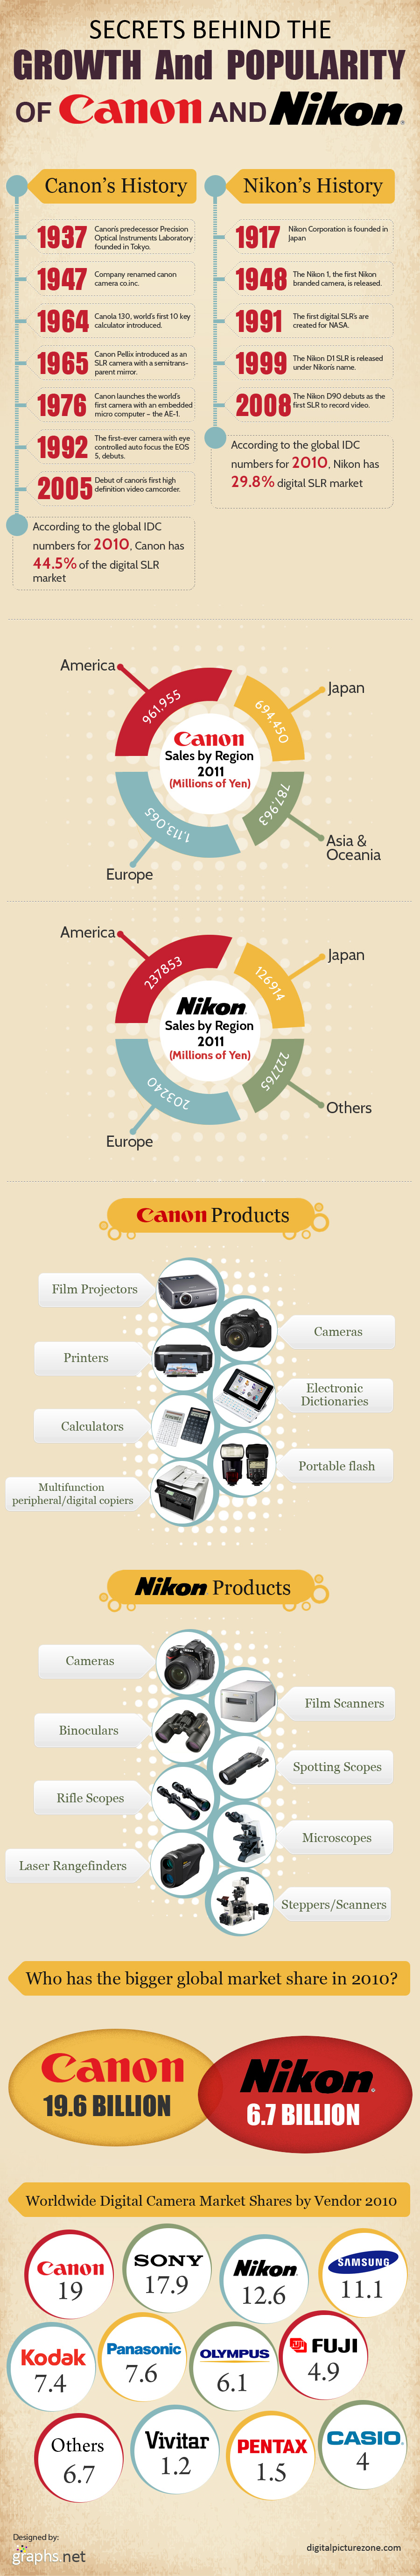 Secrets Behind the Growth and Popularity of Canon and Nikon